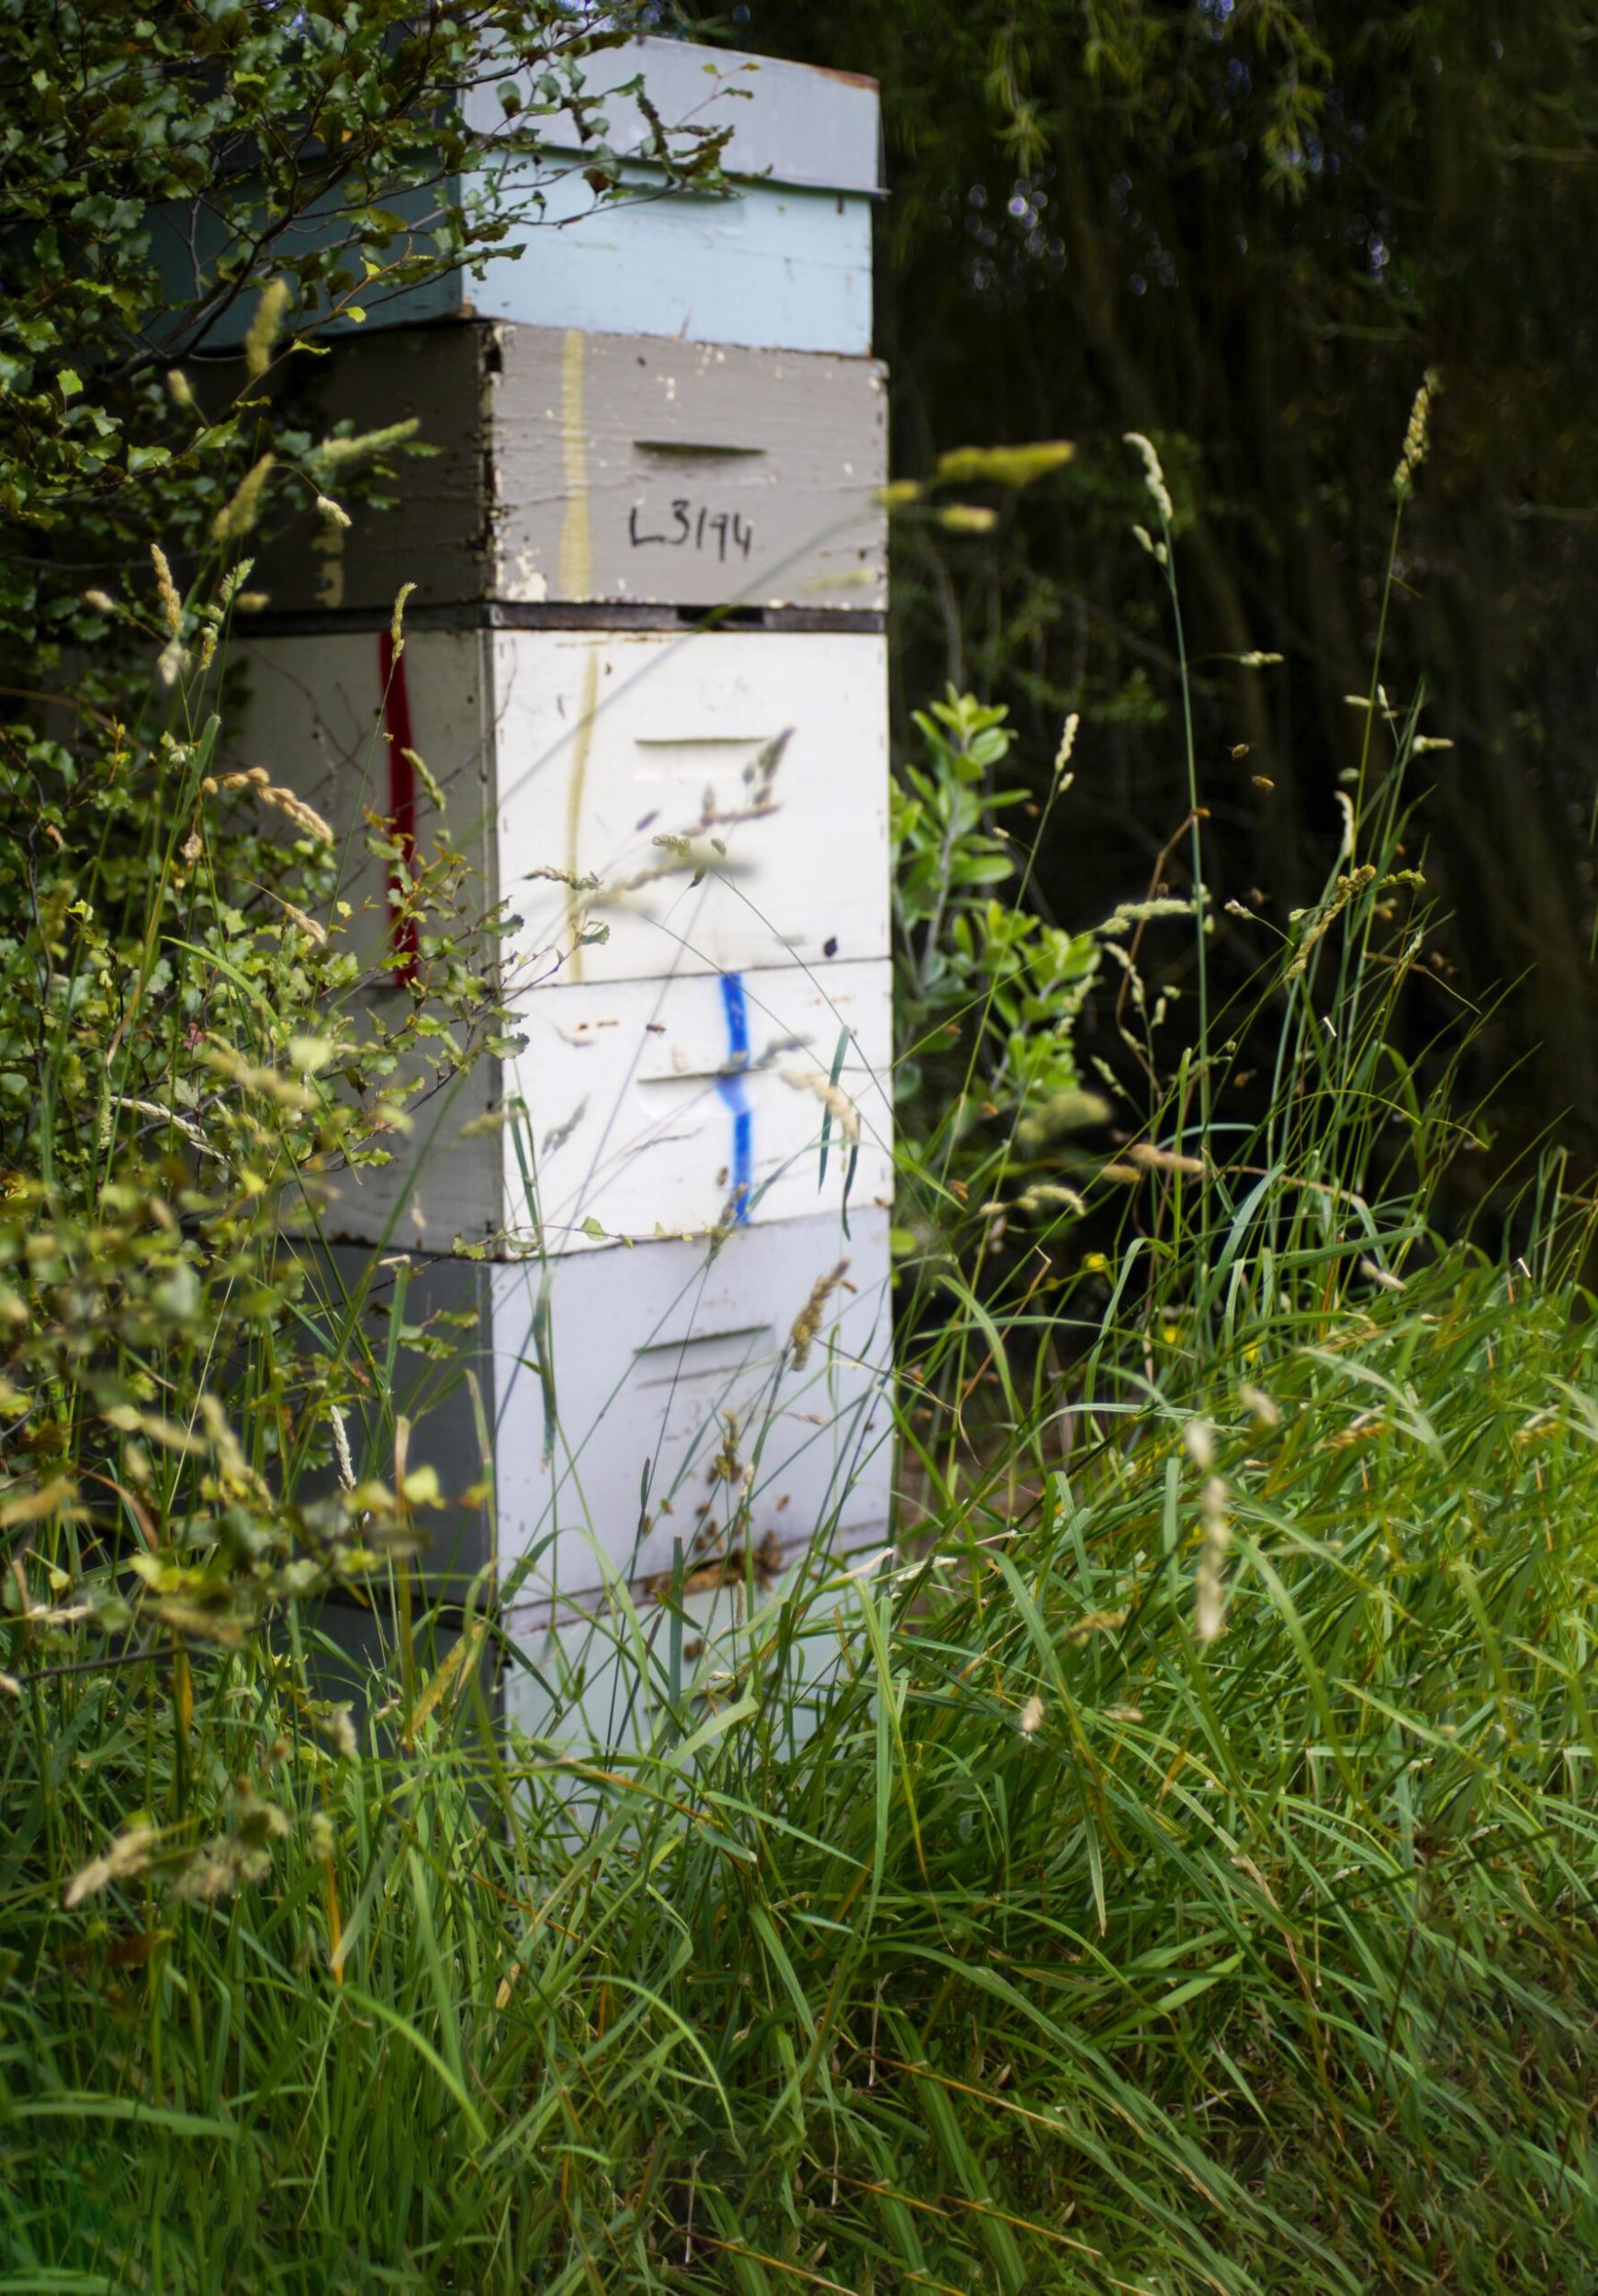 A stack of beehives standing in a garden